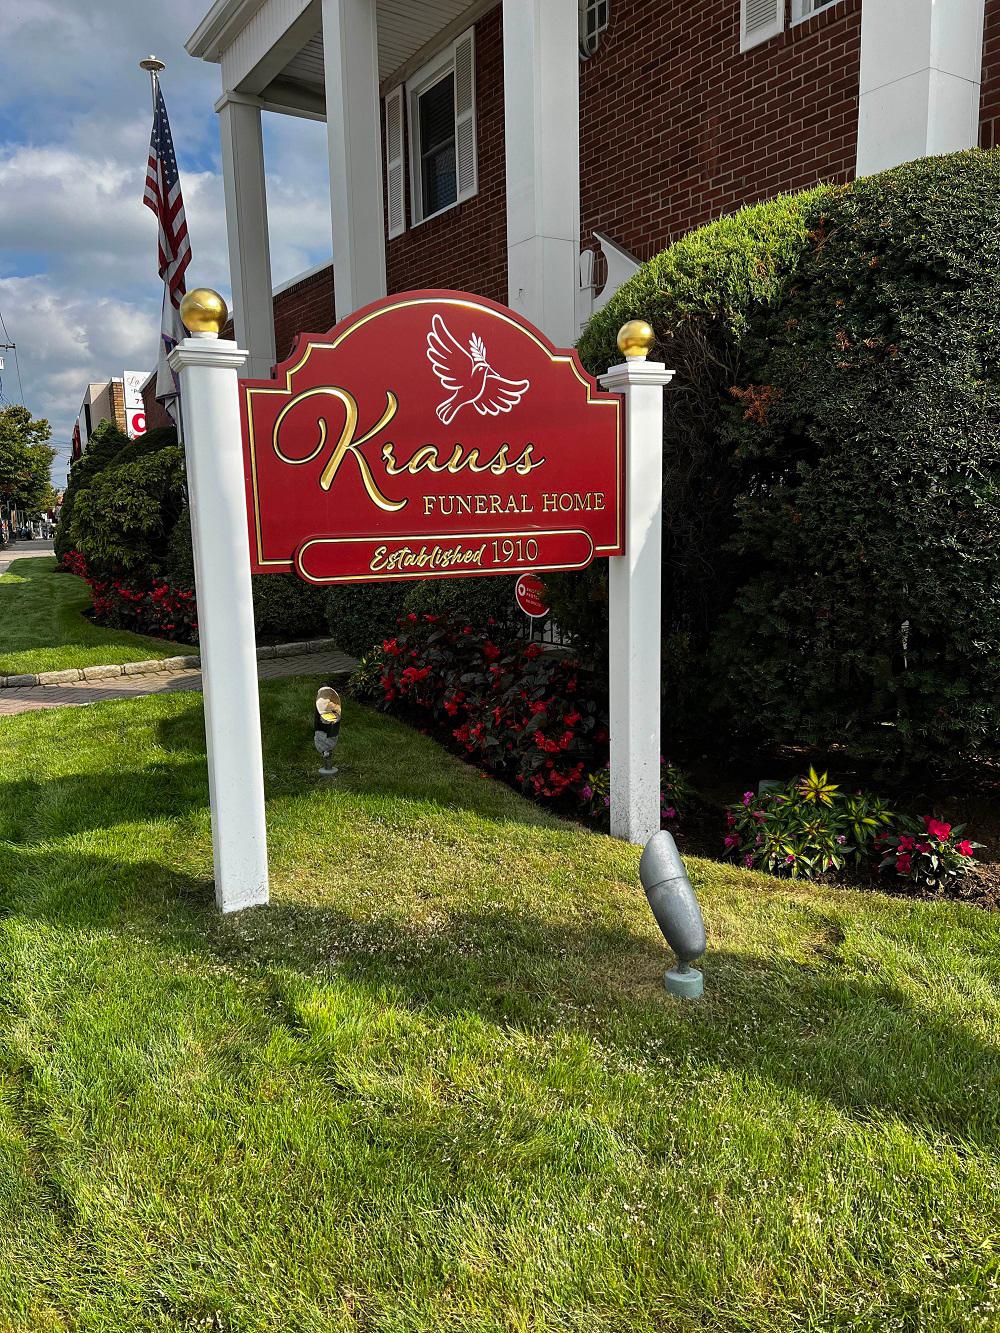 Krauss Funeral Home Inc. in Franklin Square, New York